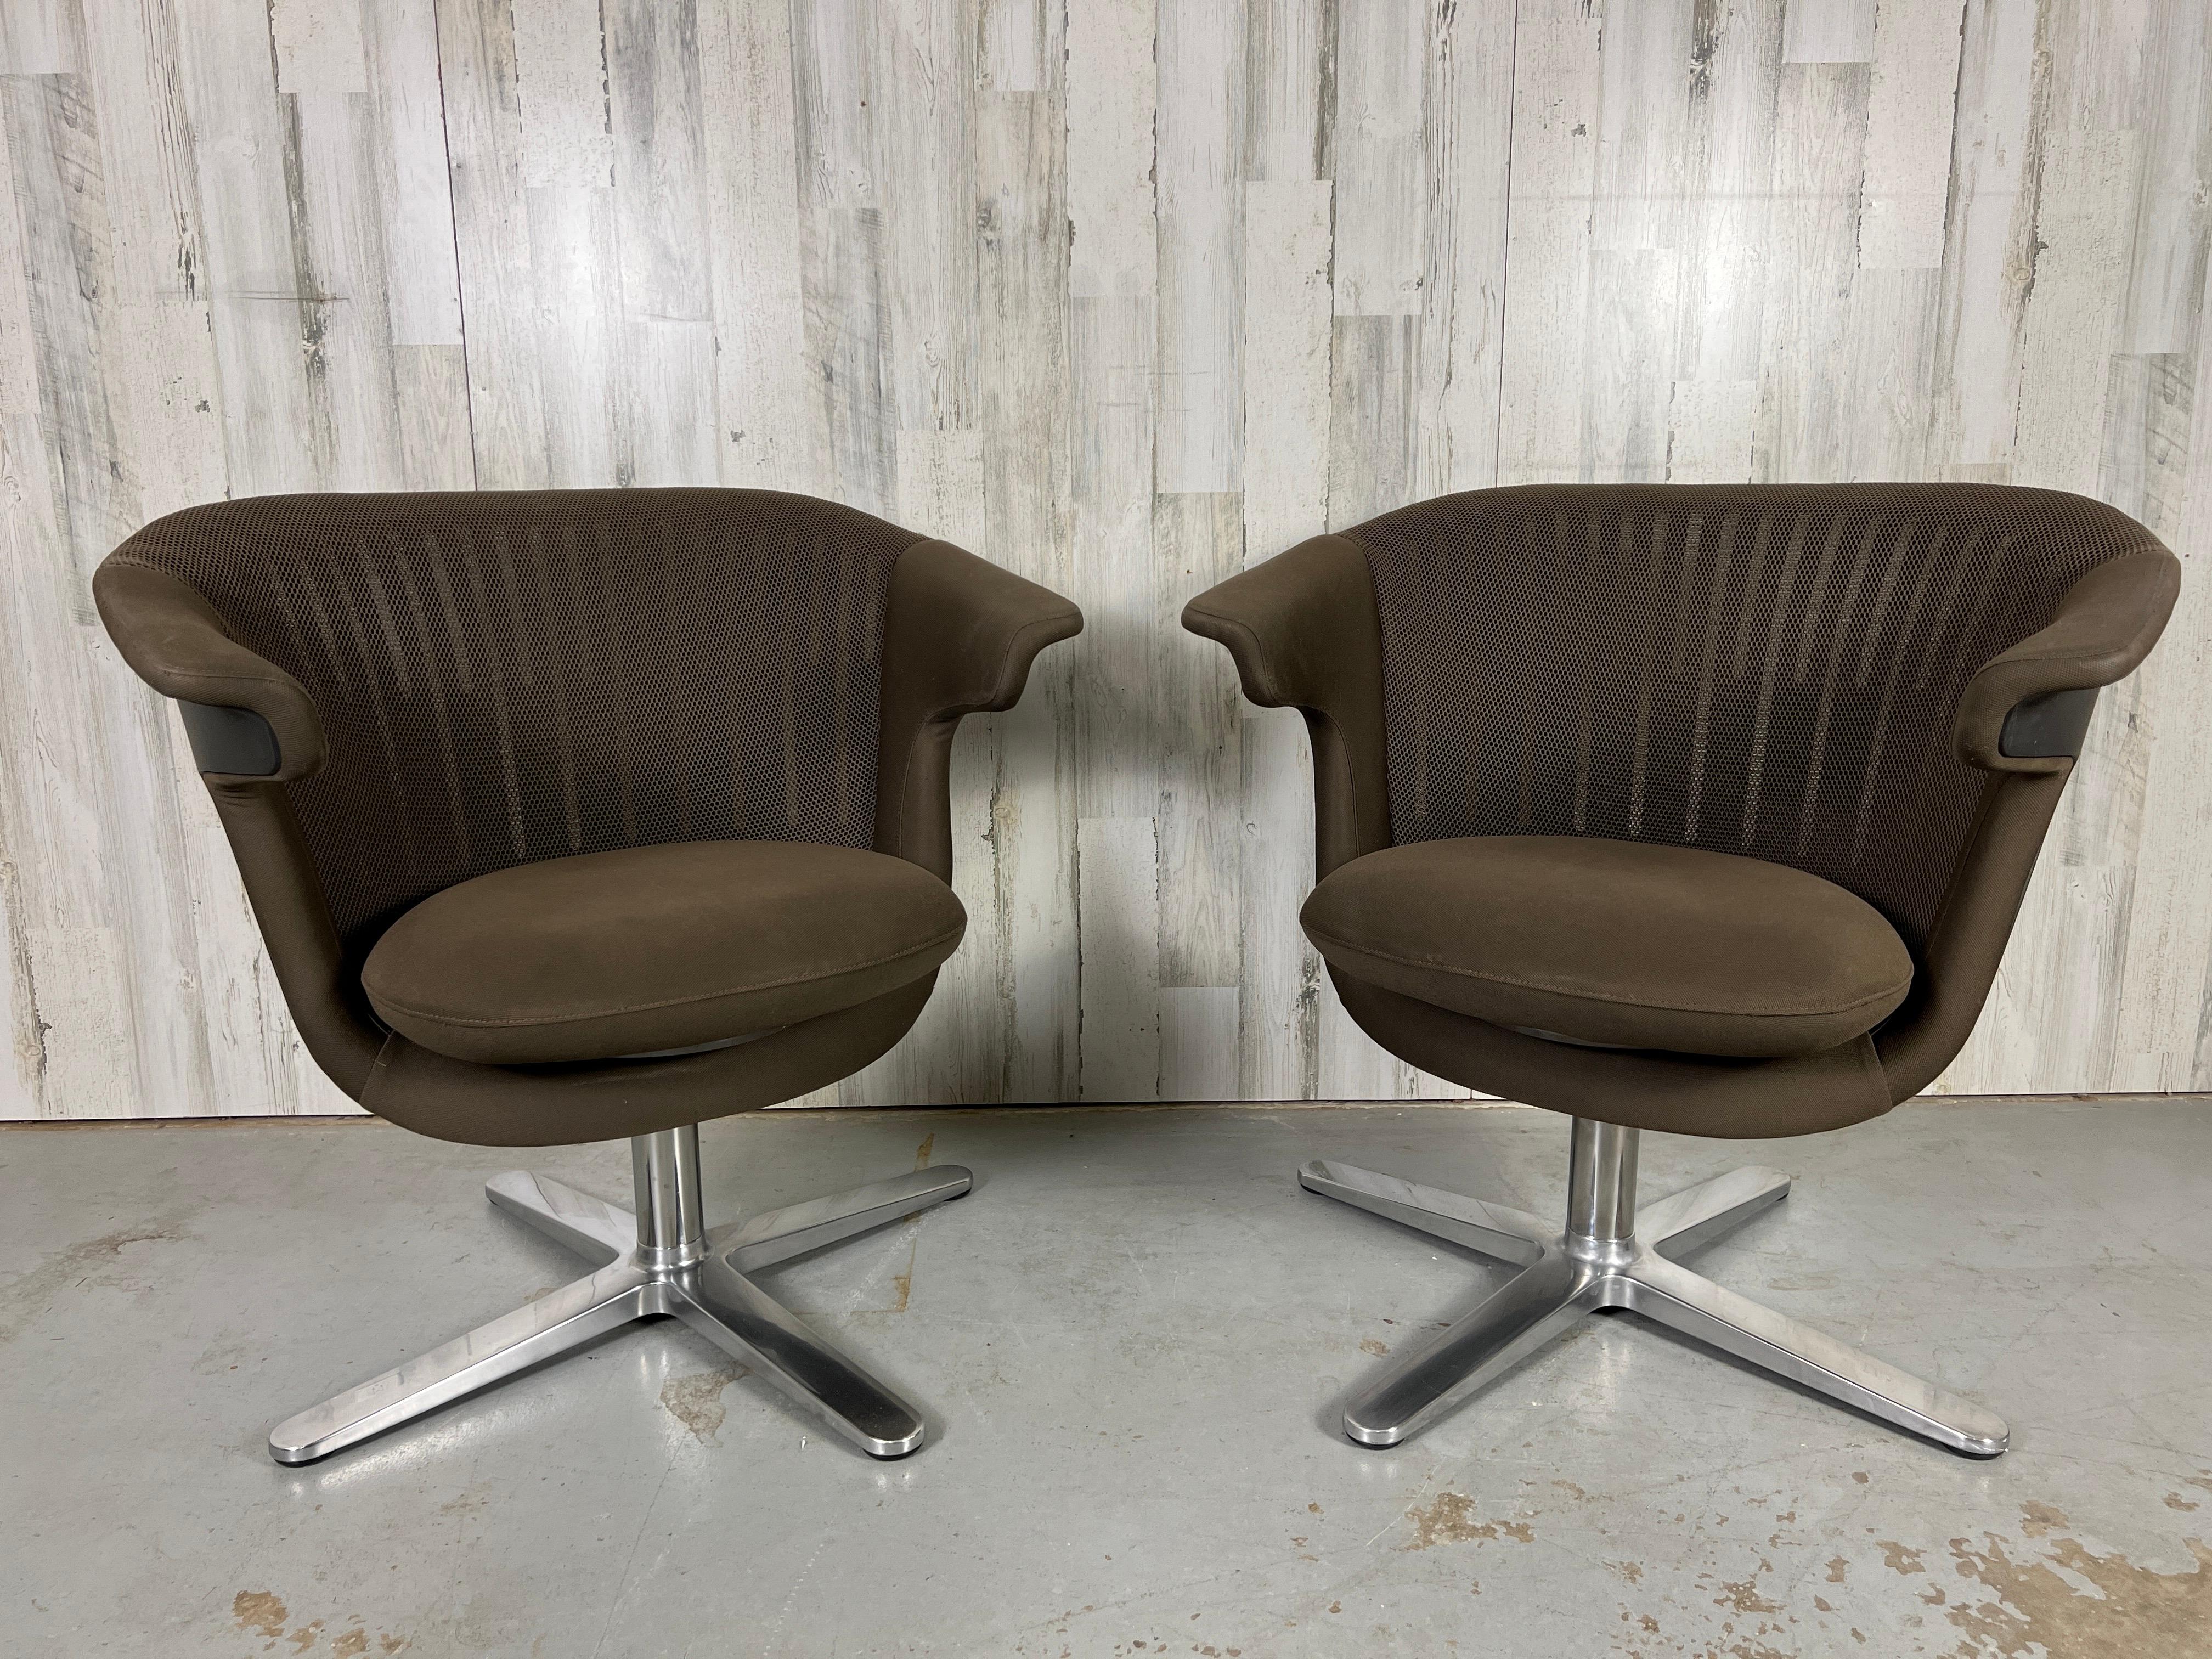 Steelcase  i2i Swivel Club Chairs  In Good Condition For Sale In Denton, TX